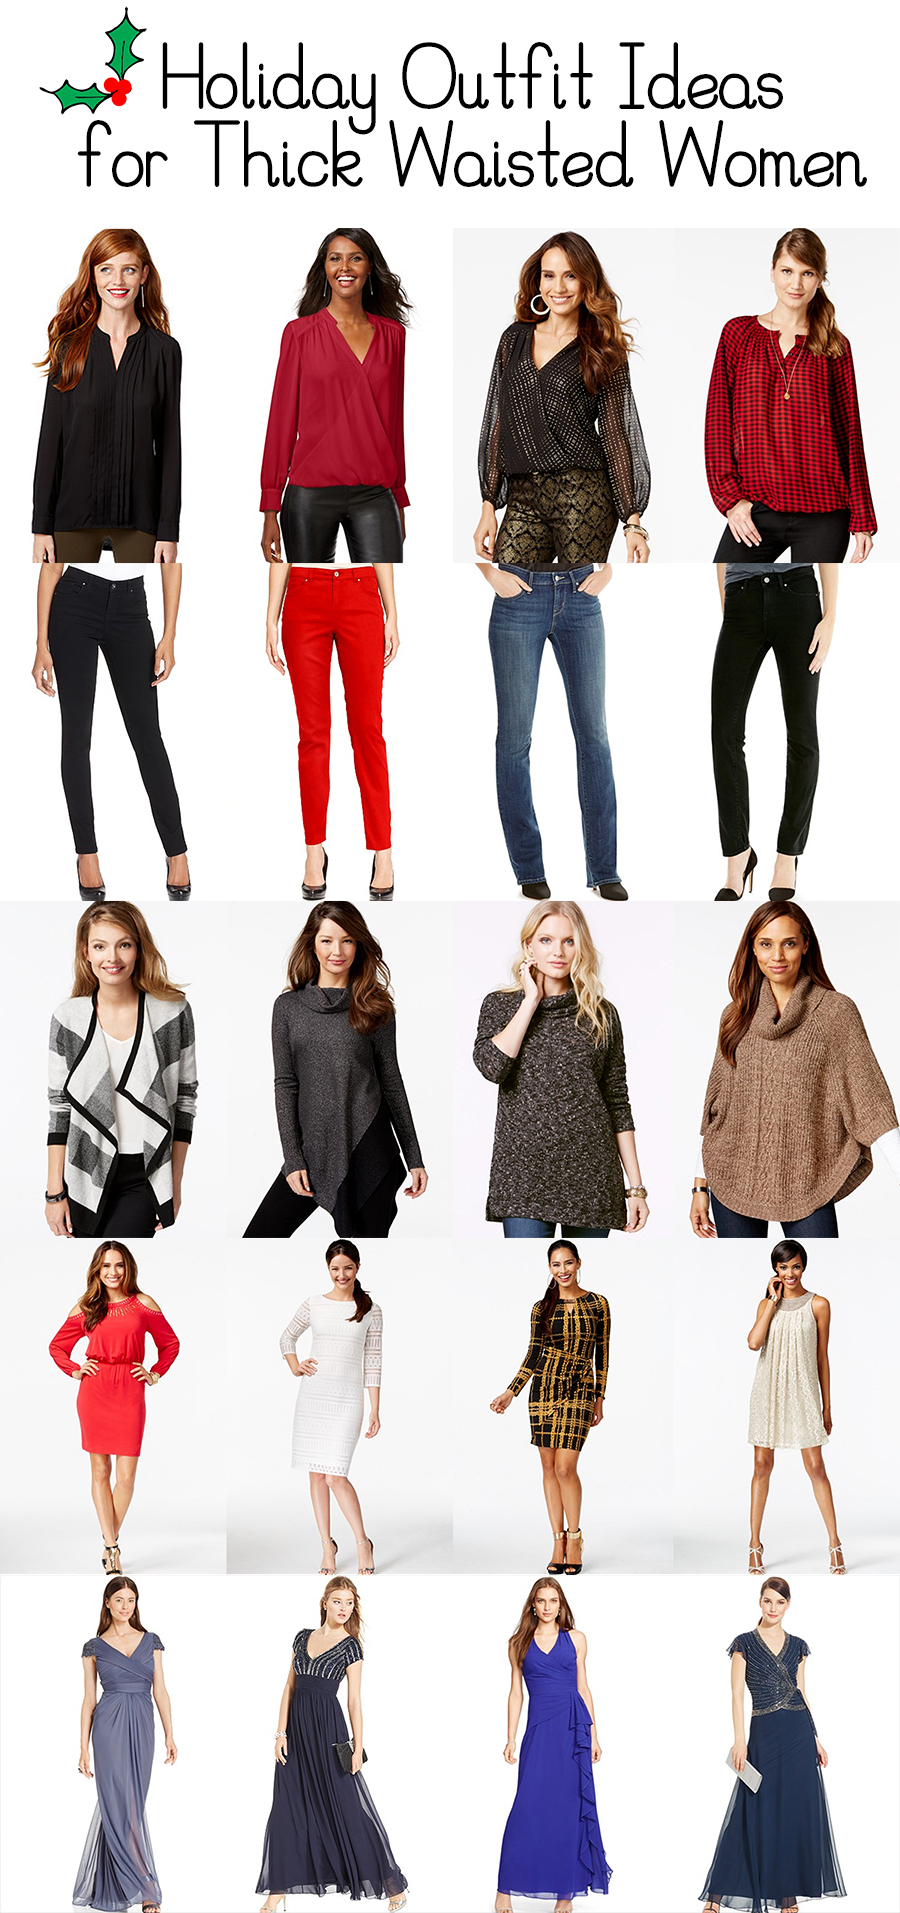 Holiday Outfit Ideas for Thick Waisted Women